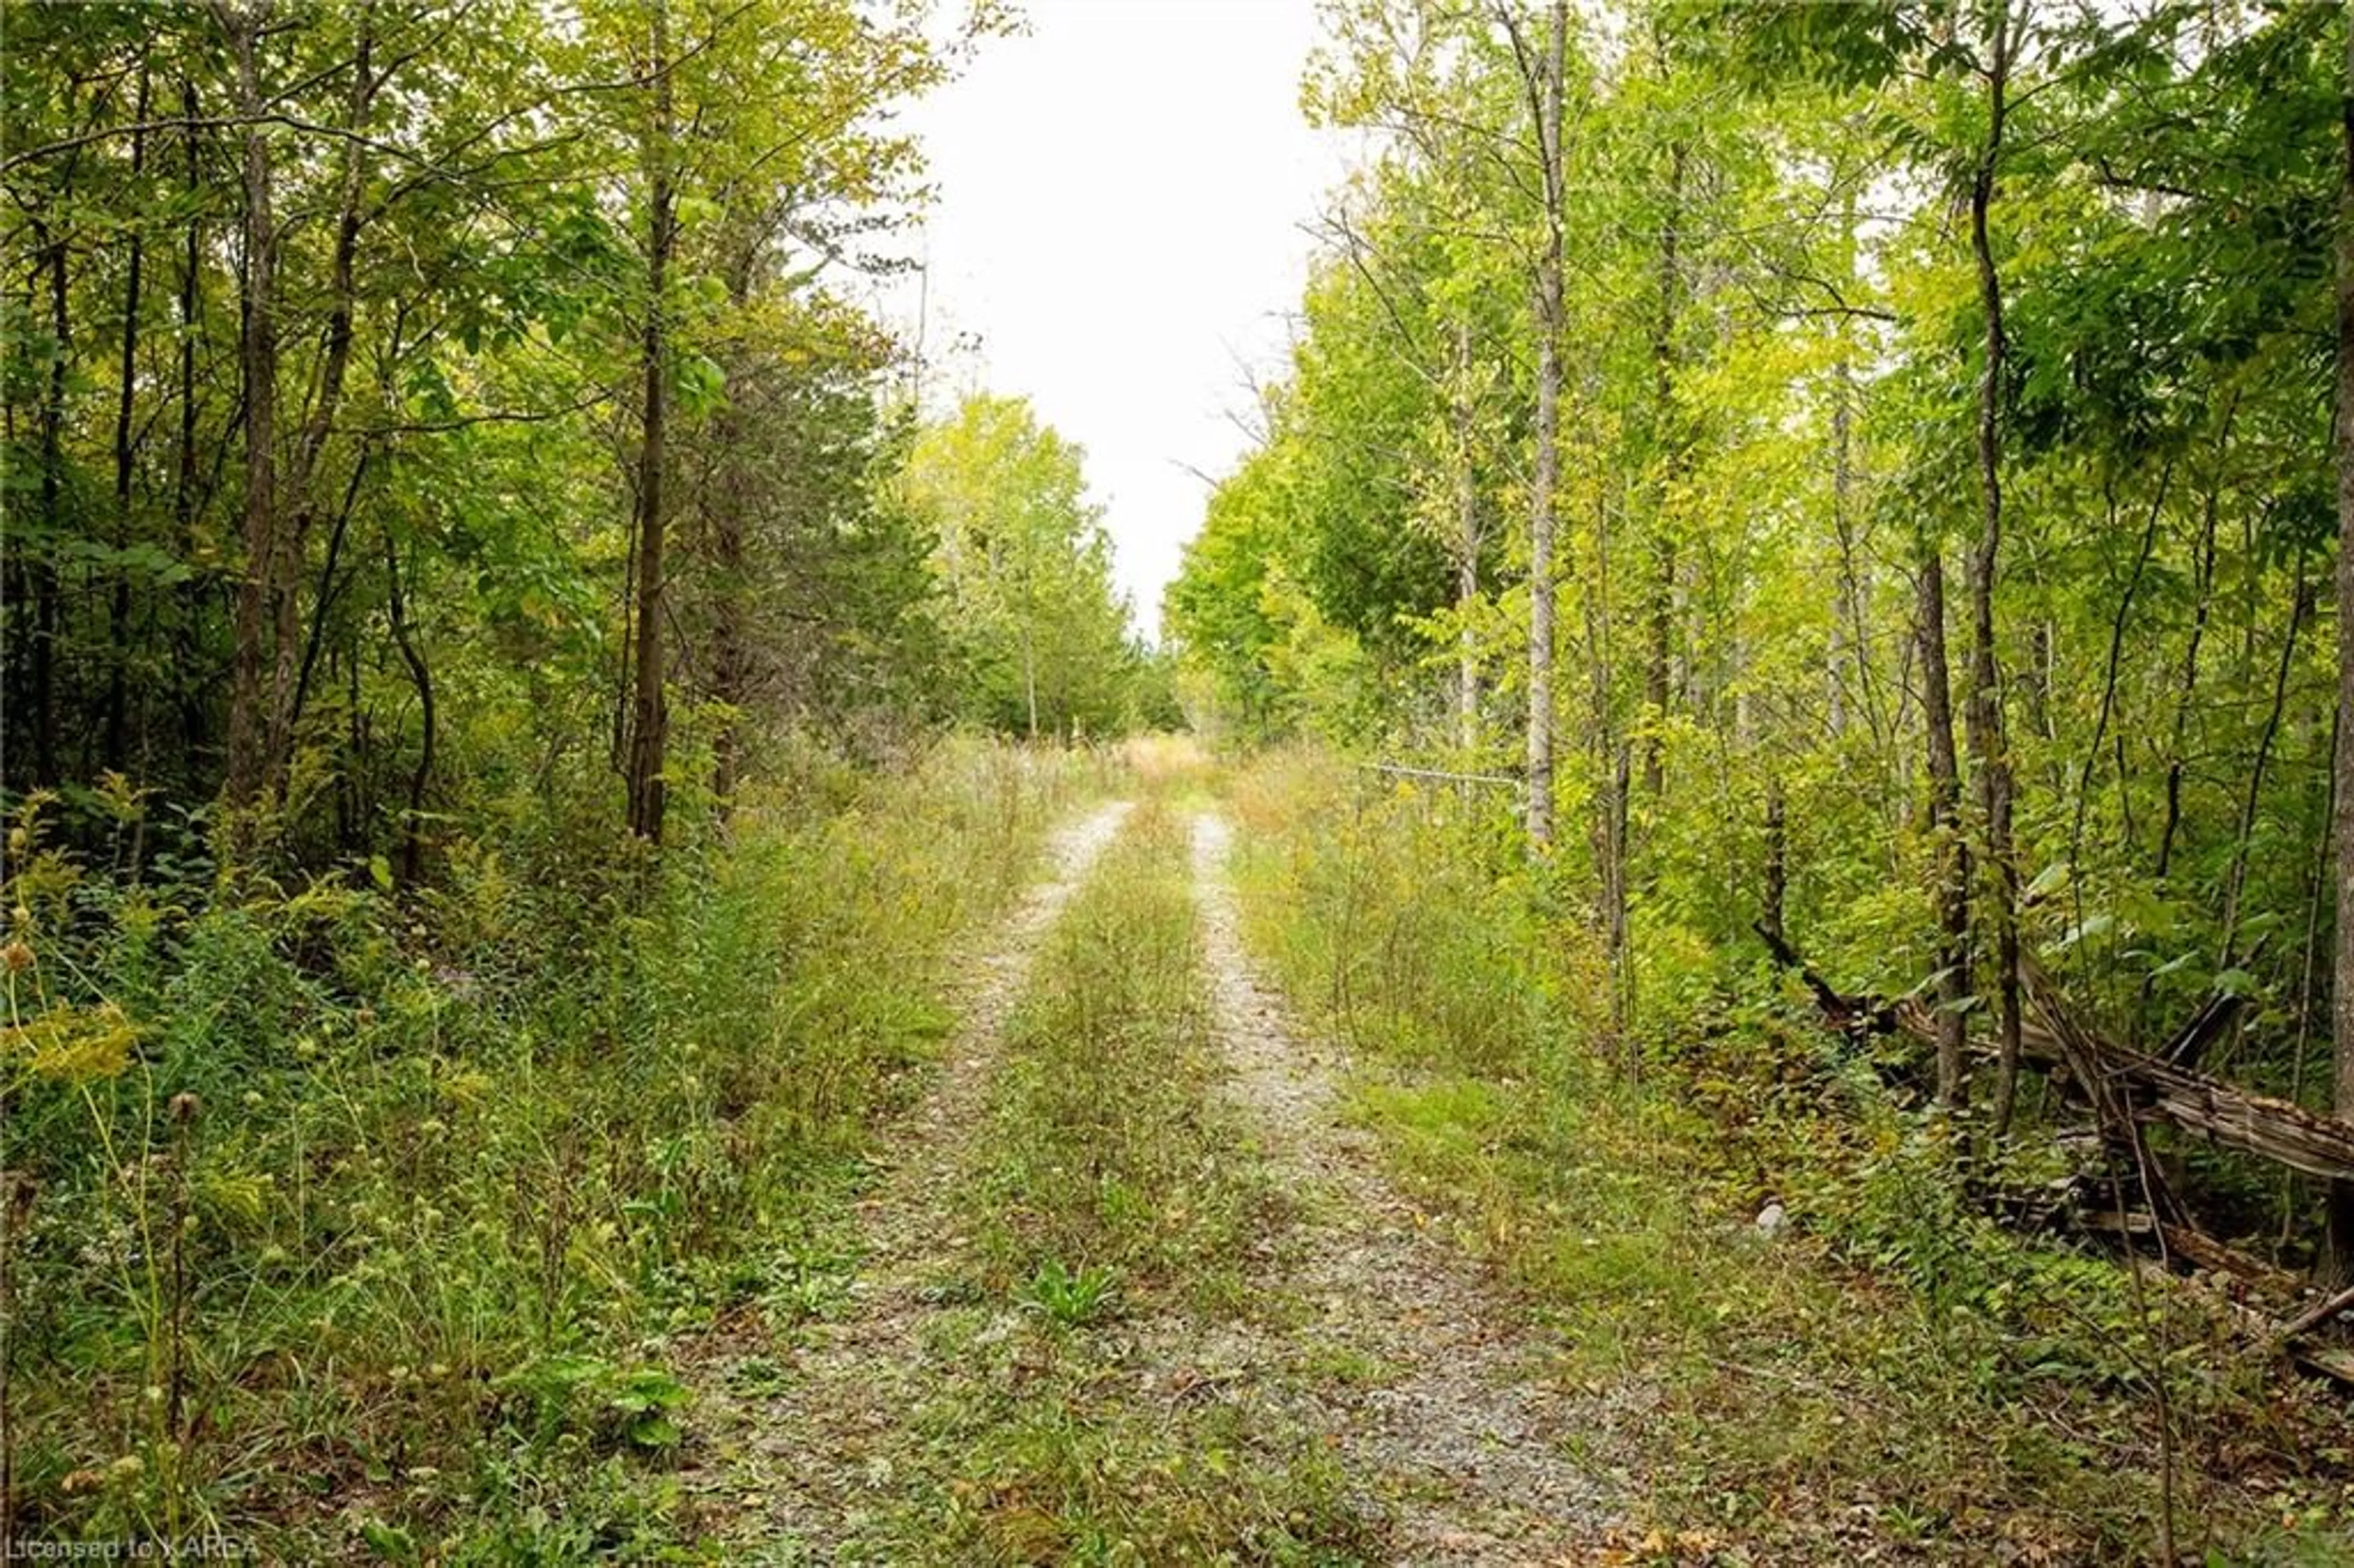 Forest view for PT LT 5 Roblin Rd, Roblin Ontario K0K 2W0